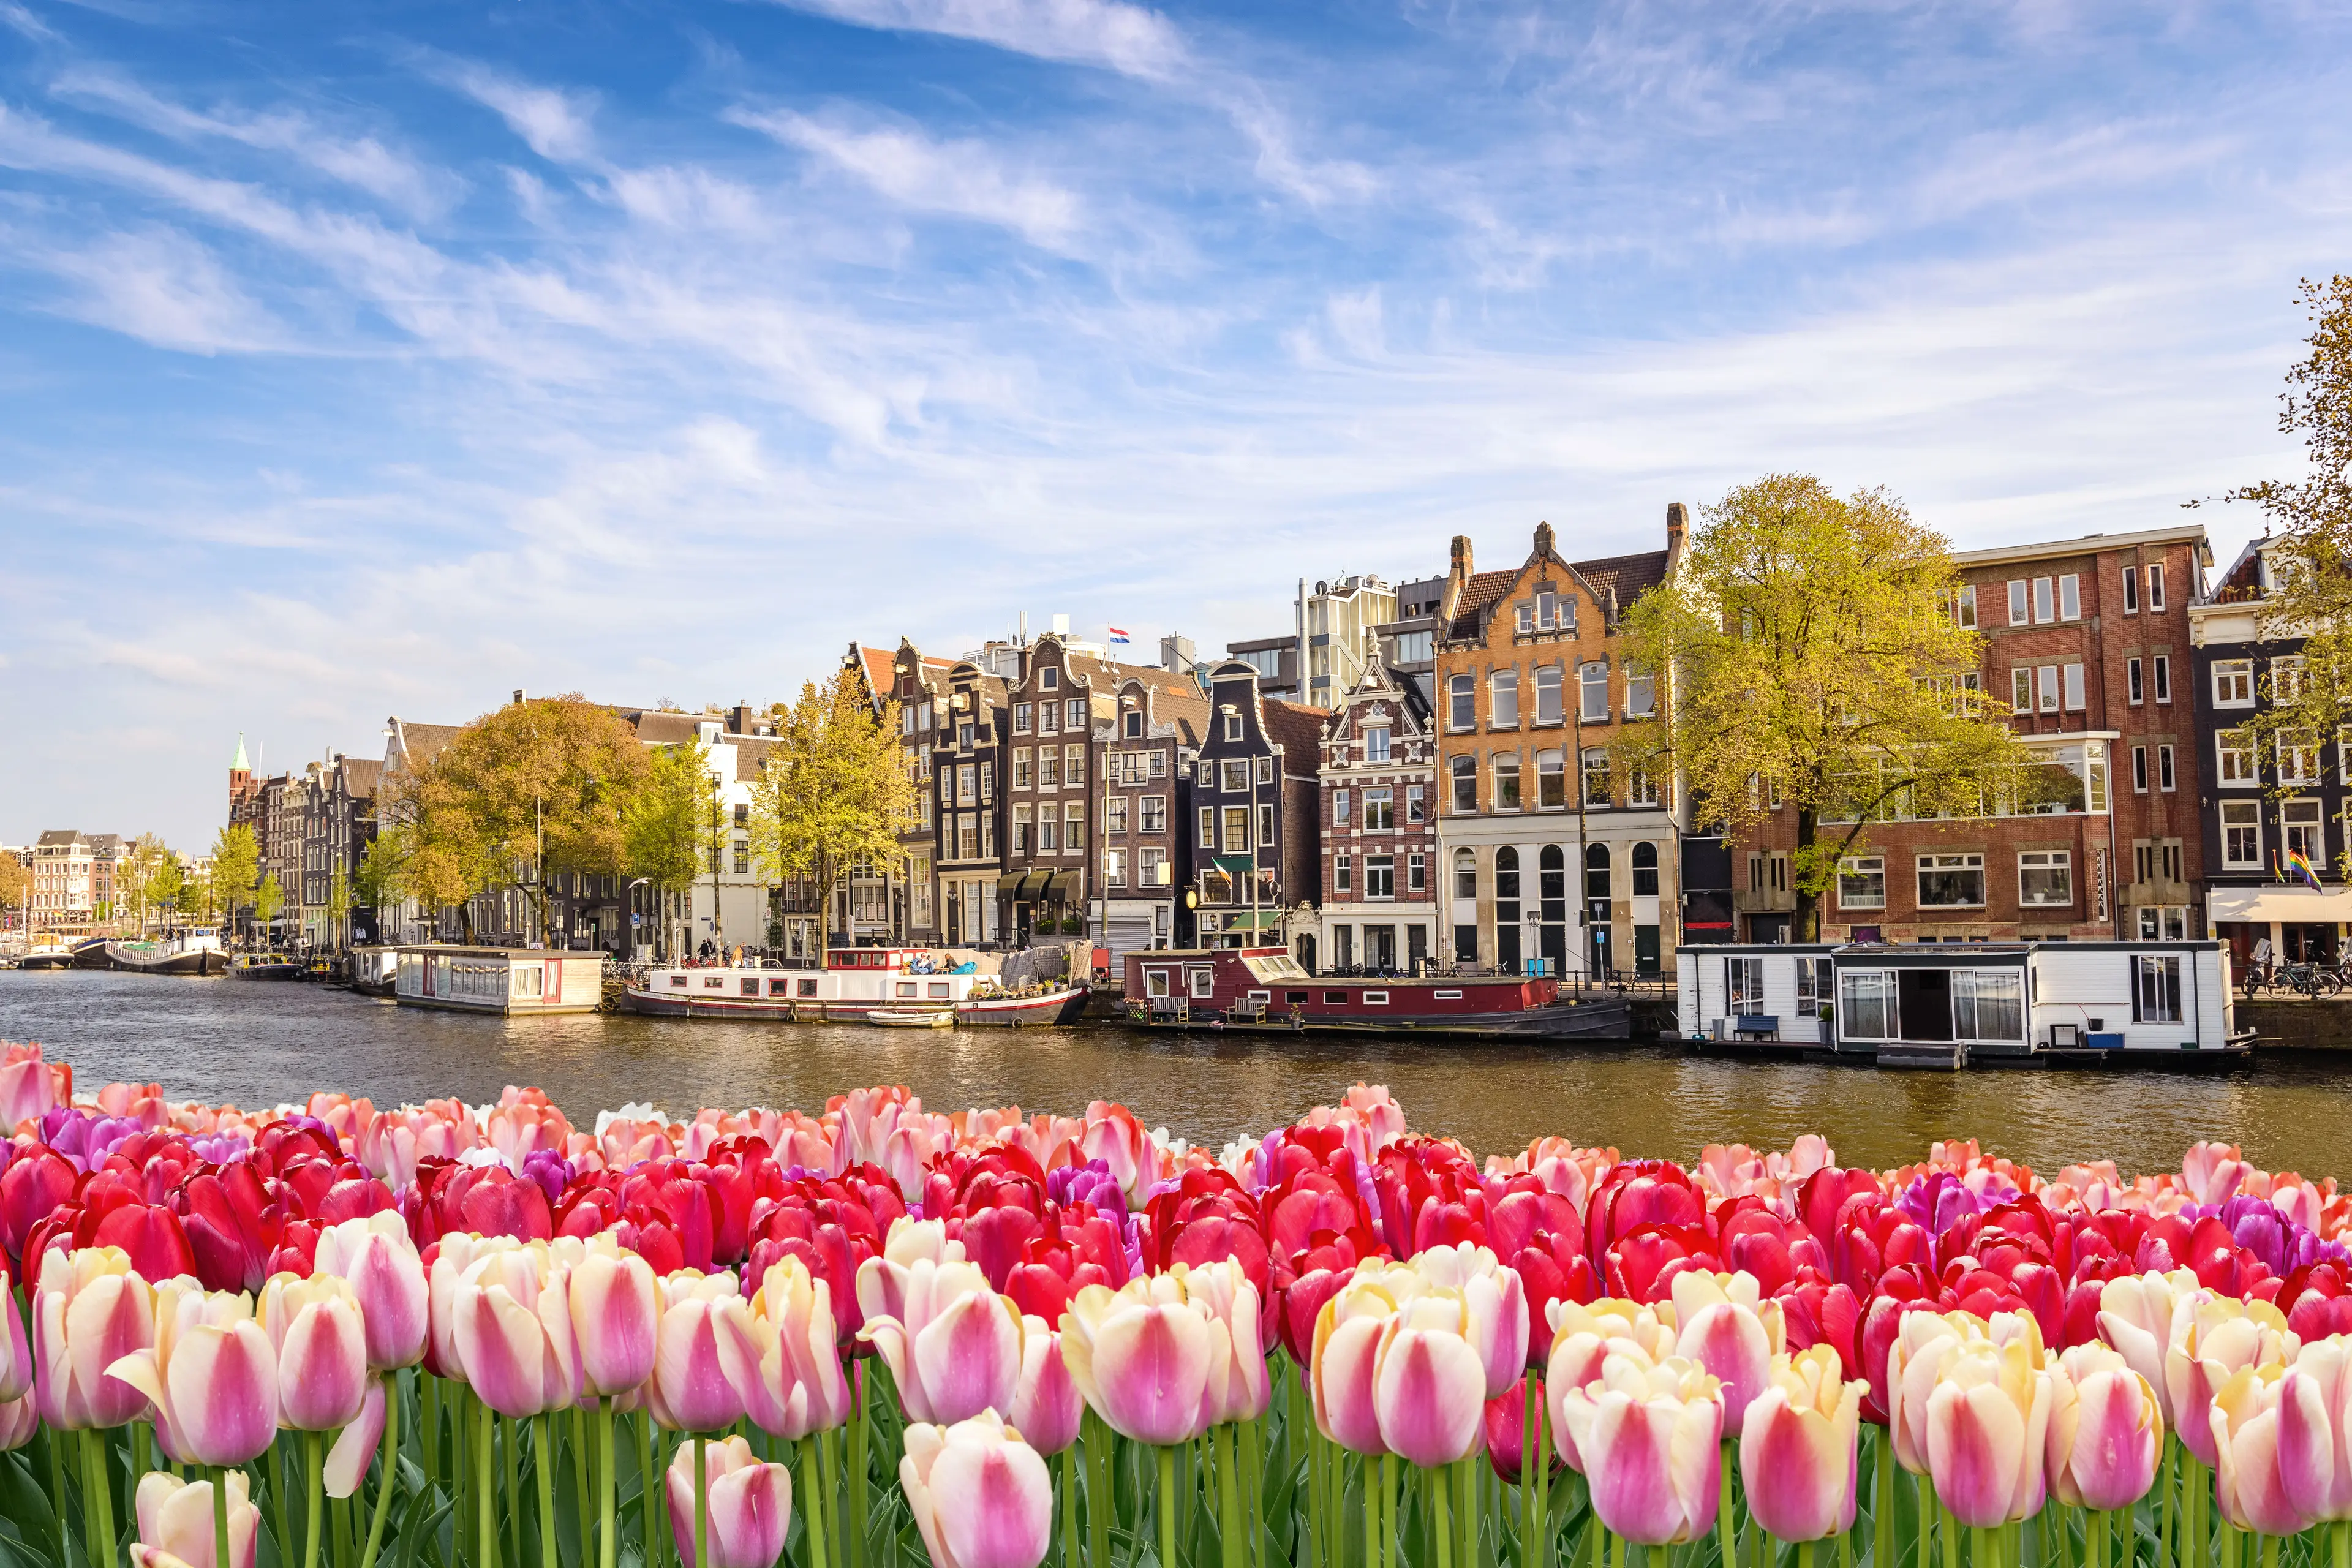 3-Day Amsterdam Adventure: Nightlife, Sightseeing with Friends